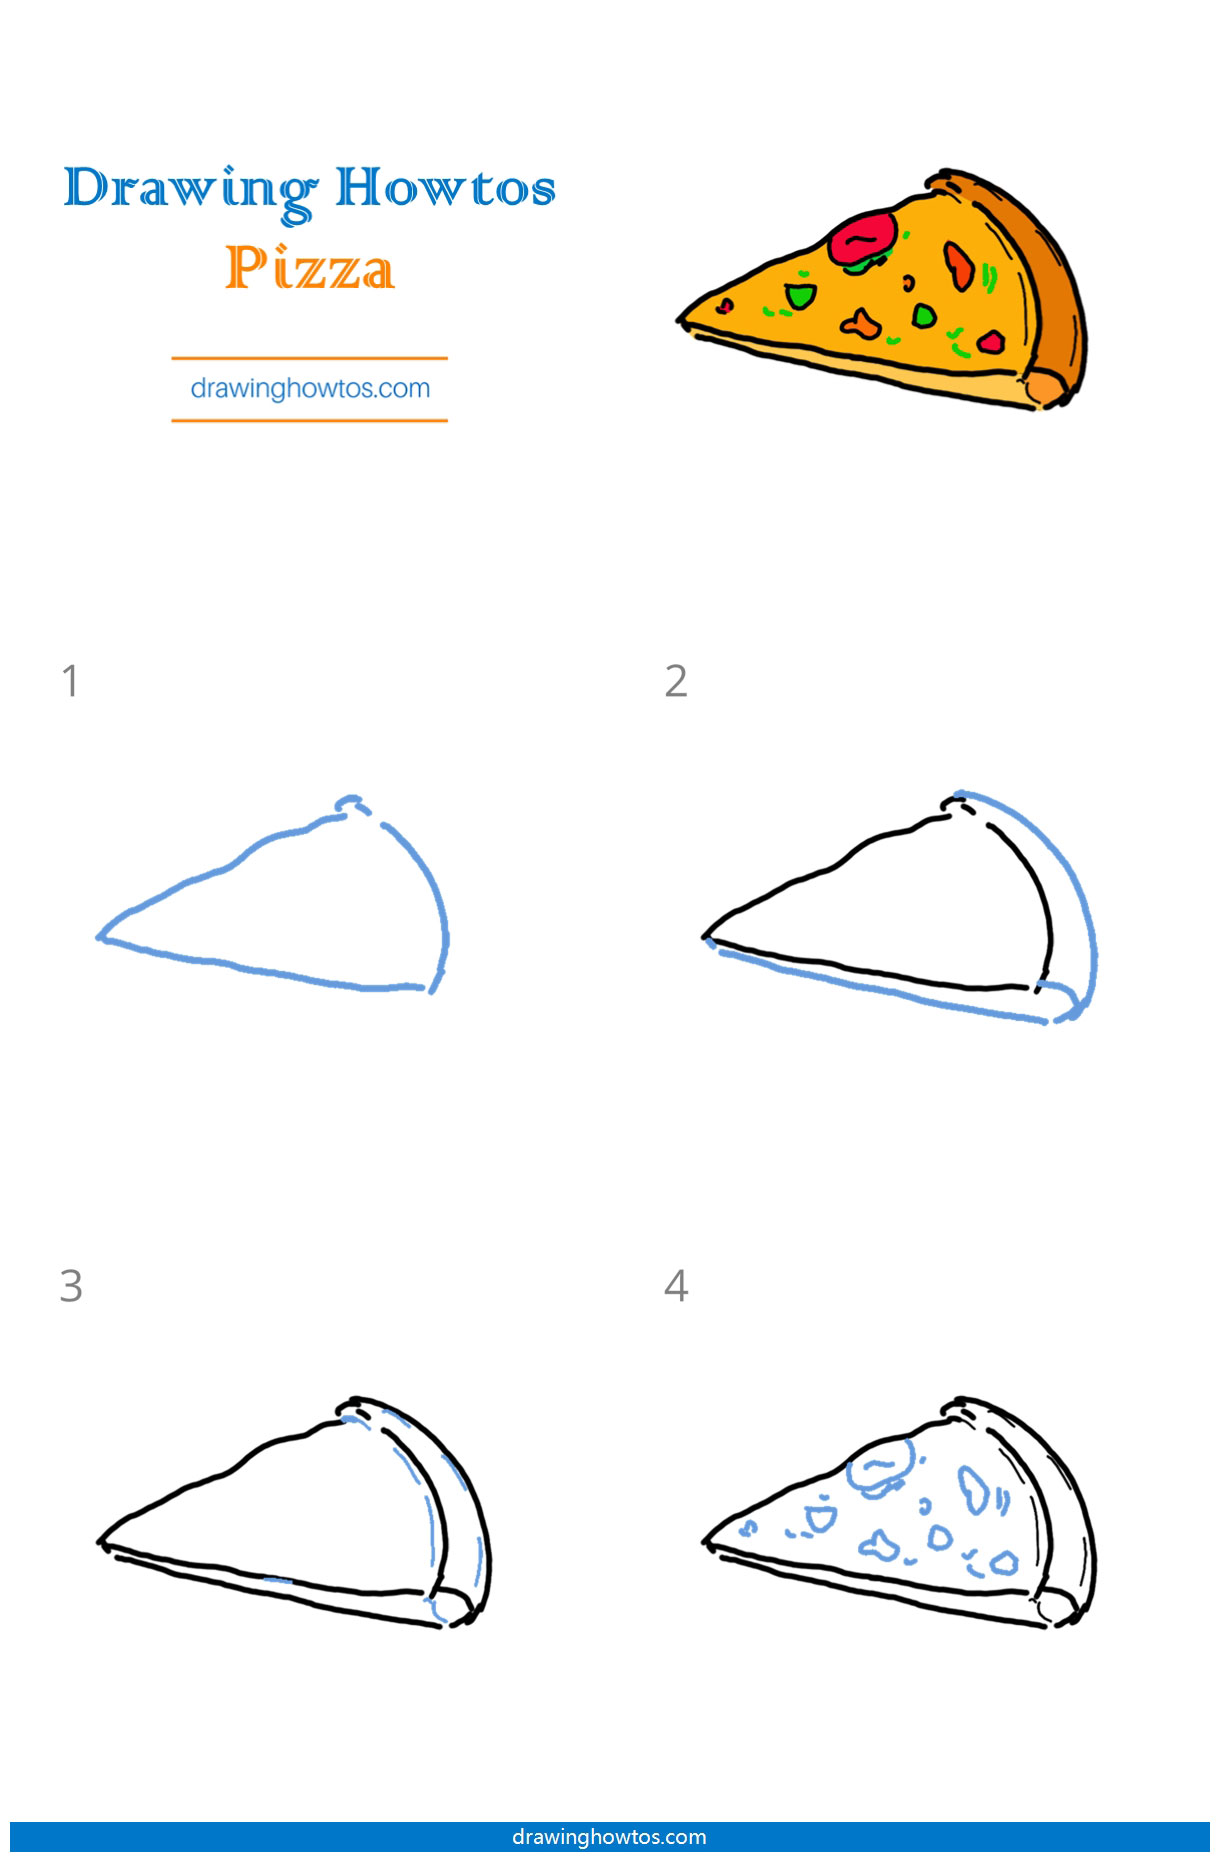 How to Draw a Piece of Pizza Step by Step